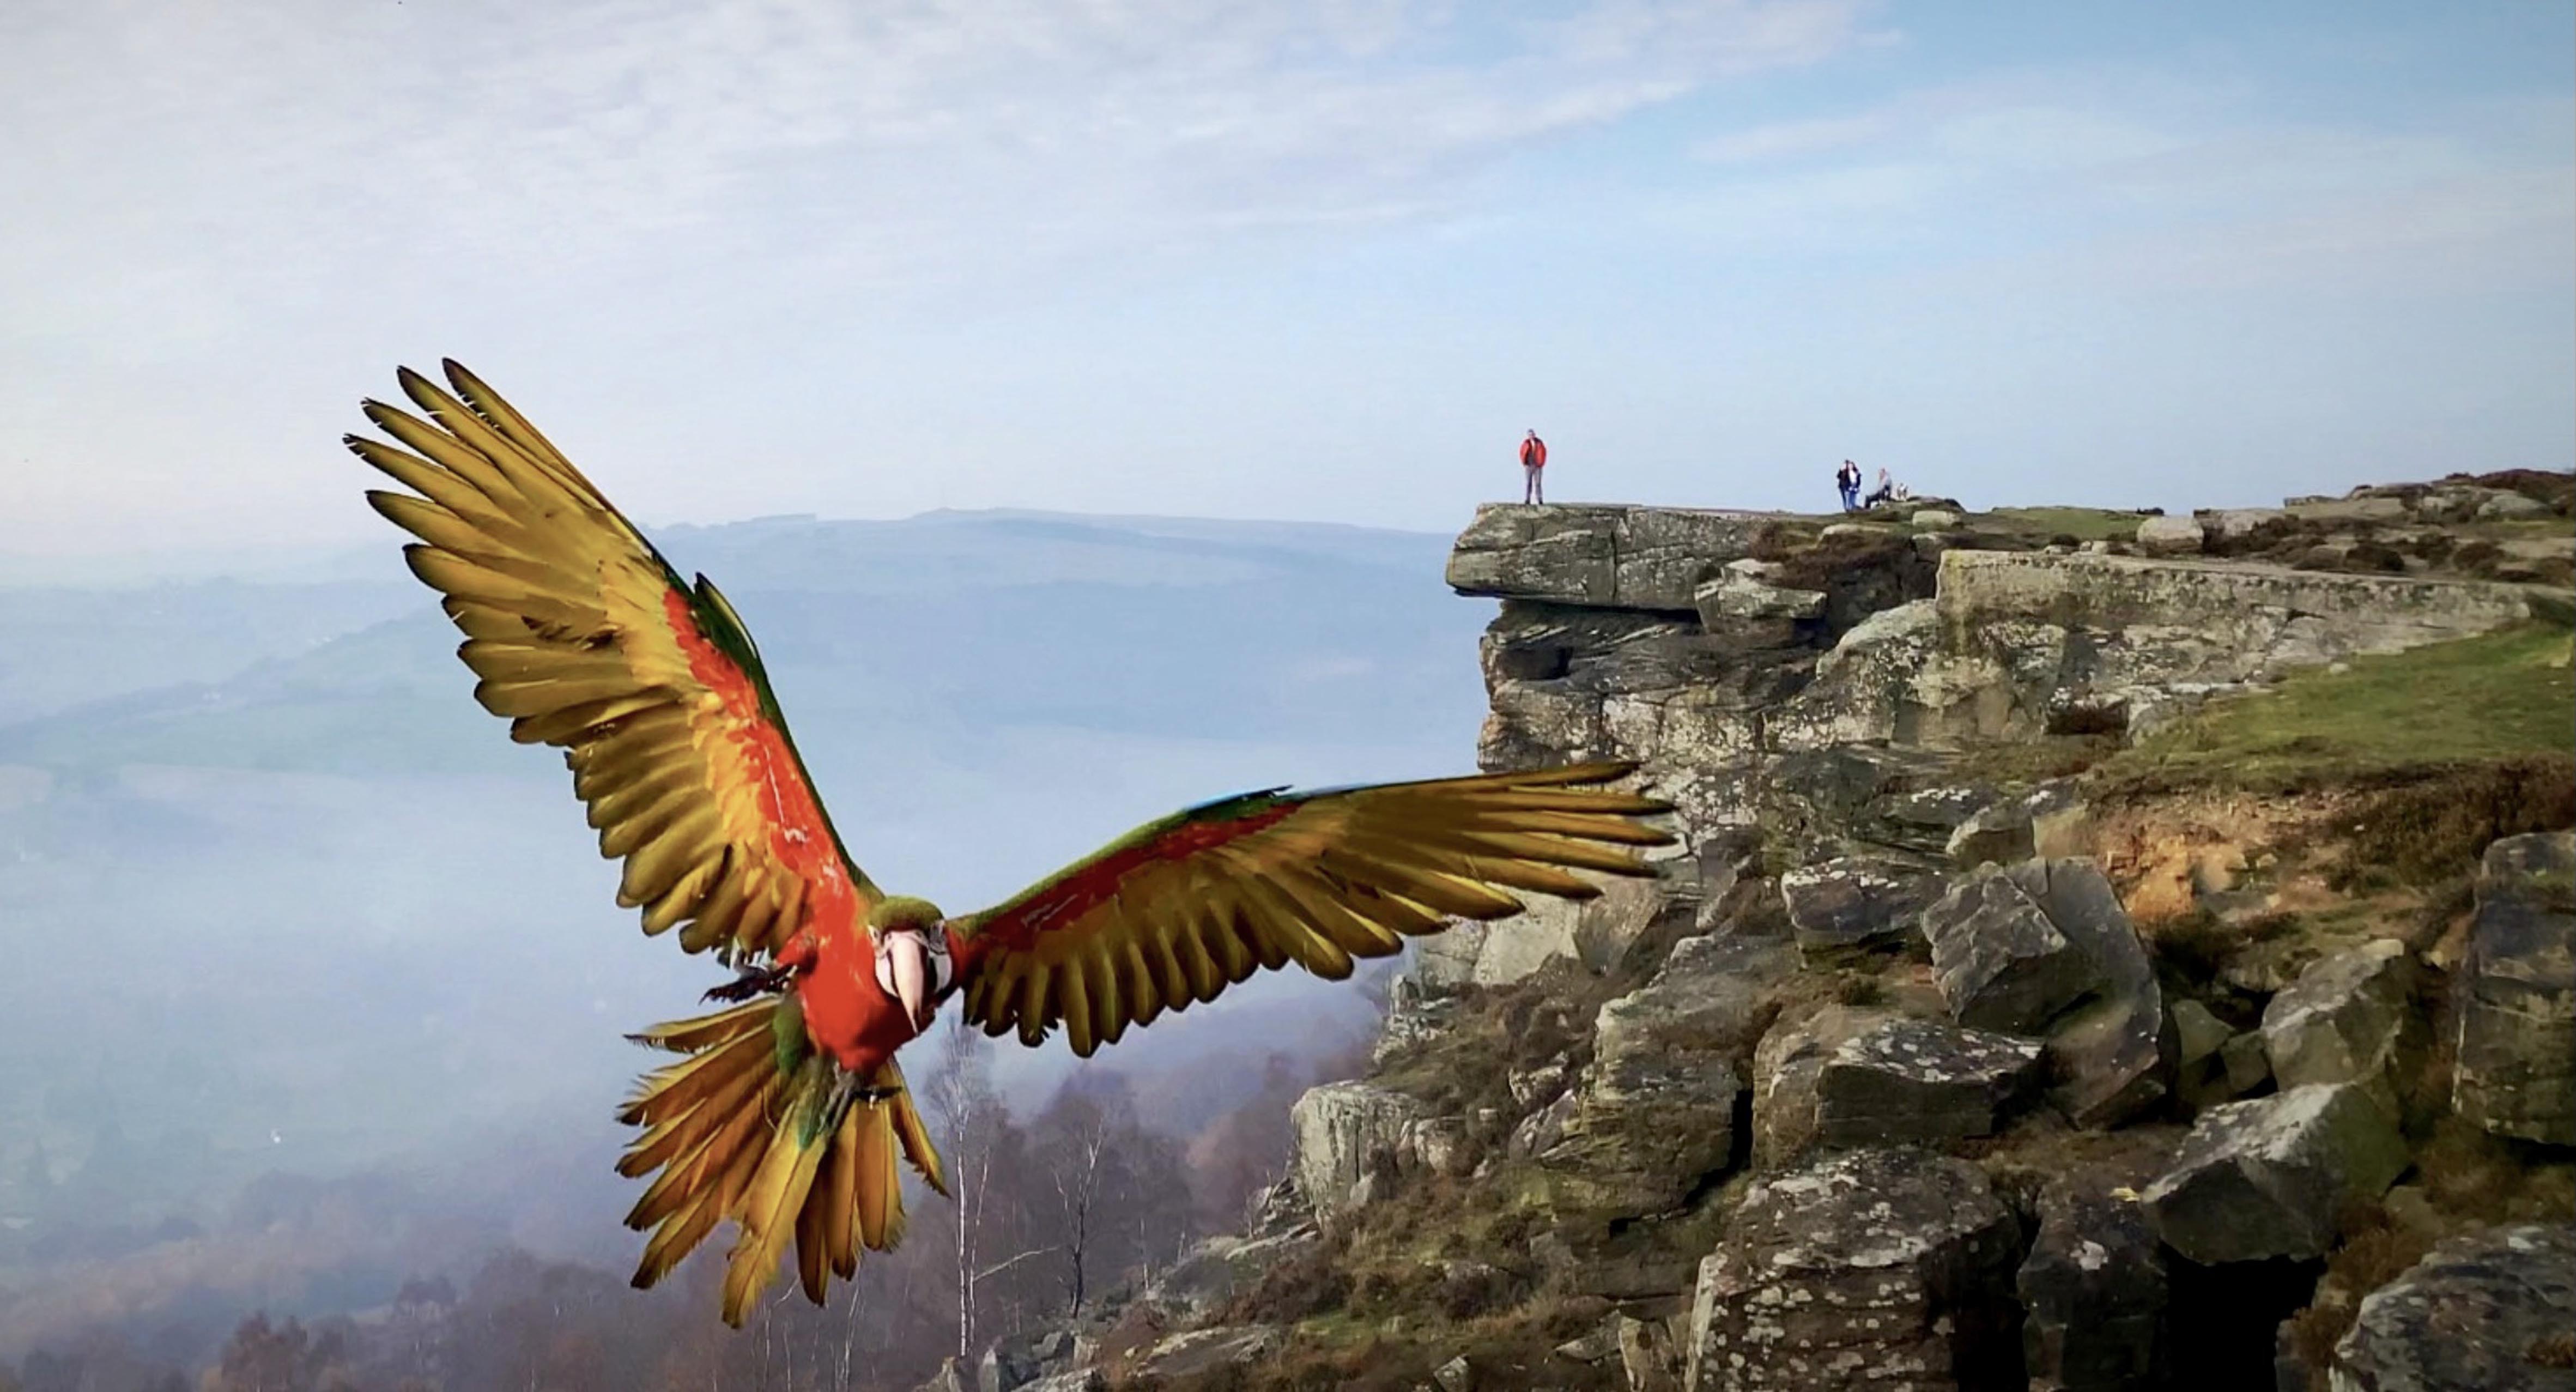 parrot-trained-to-free-fly-soars-above-spectacular-english-landscape